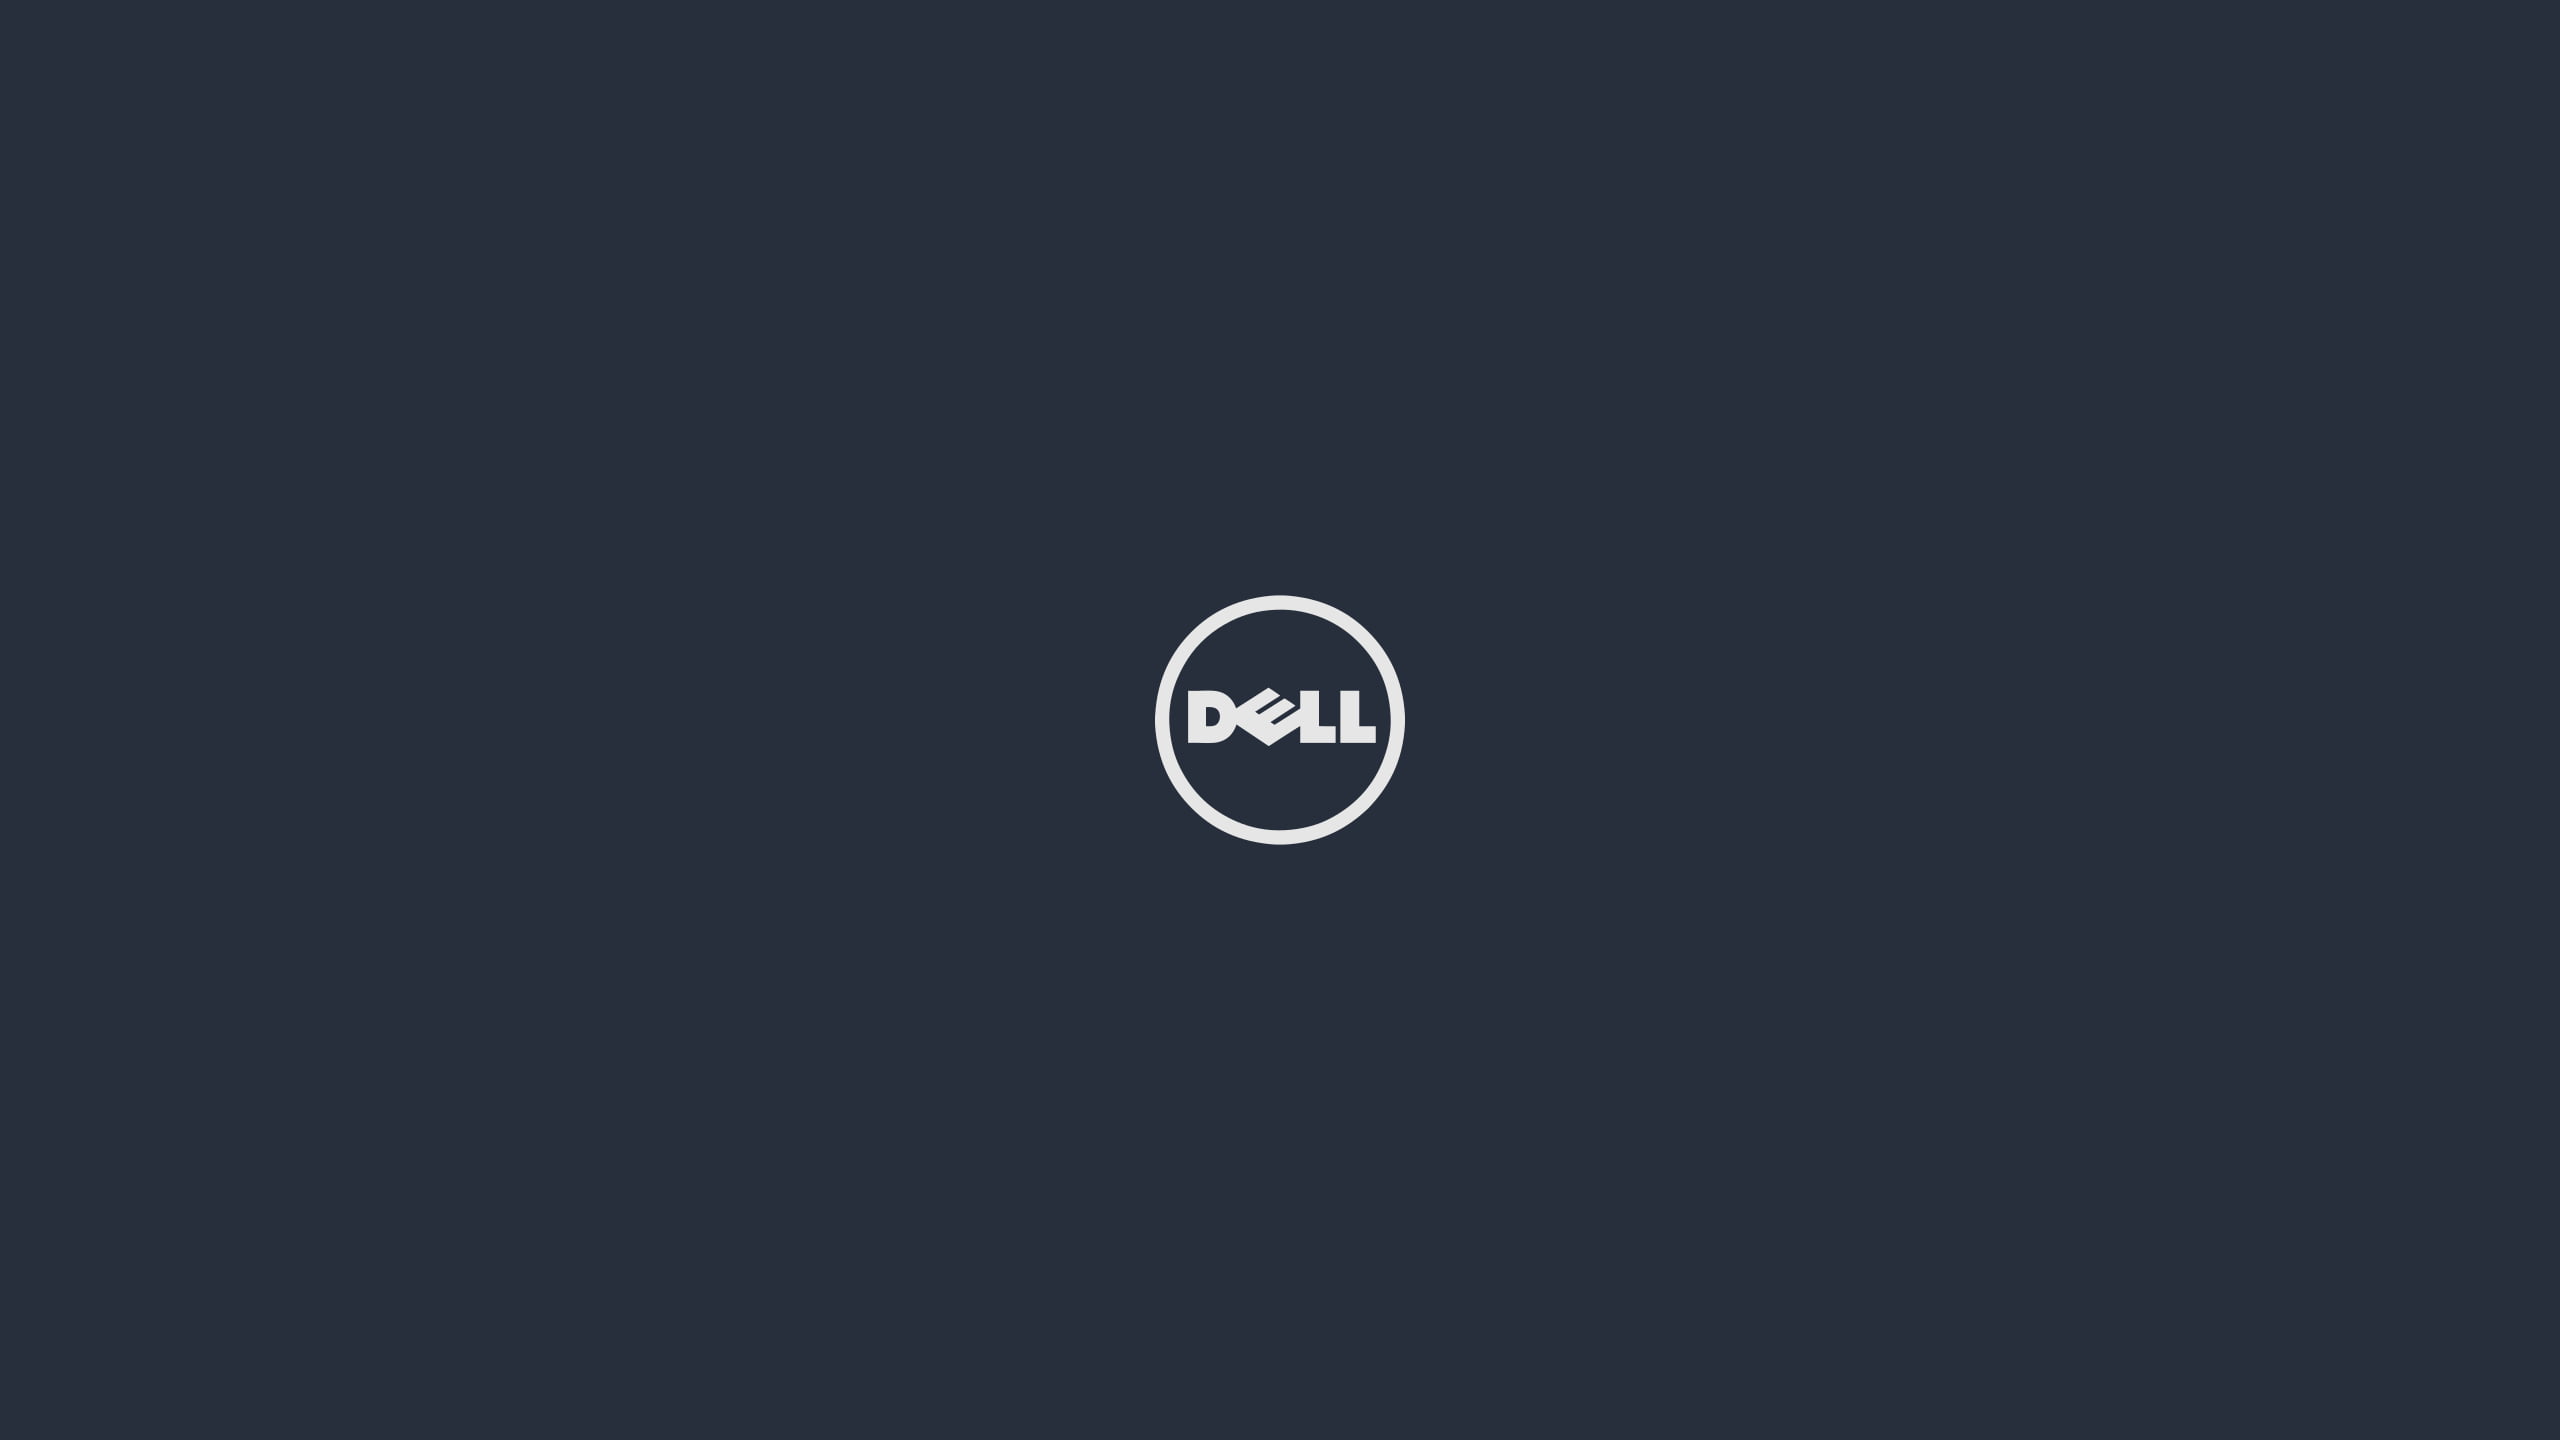 Black And White Hp Laptop Logo Brands Dell Minimalism HD